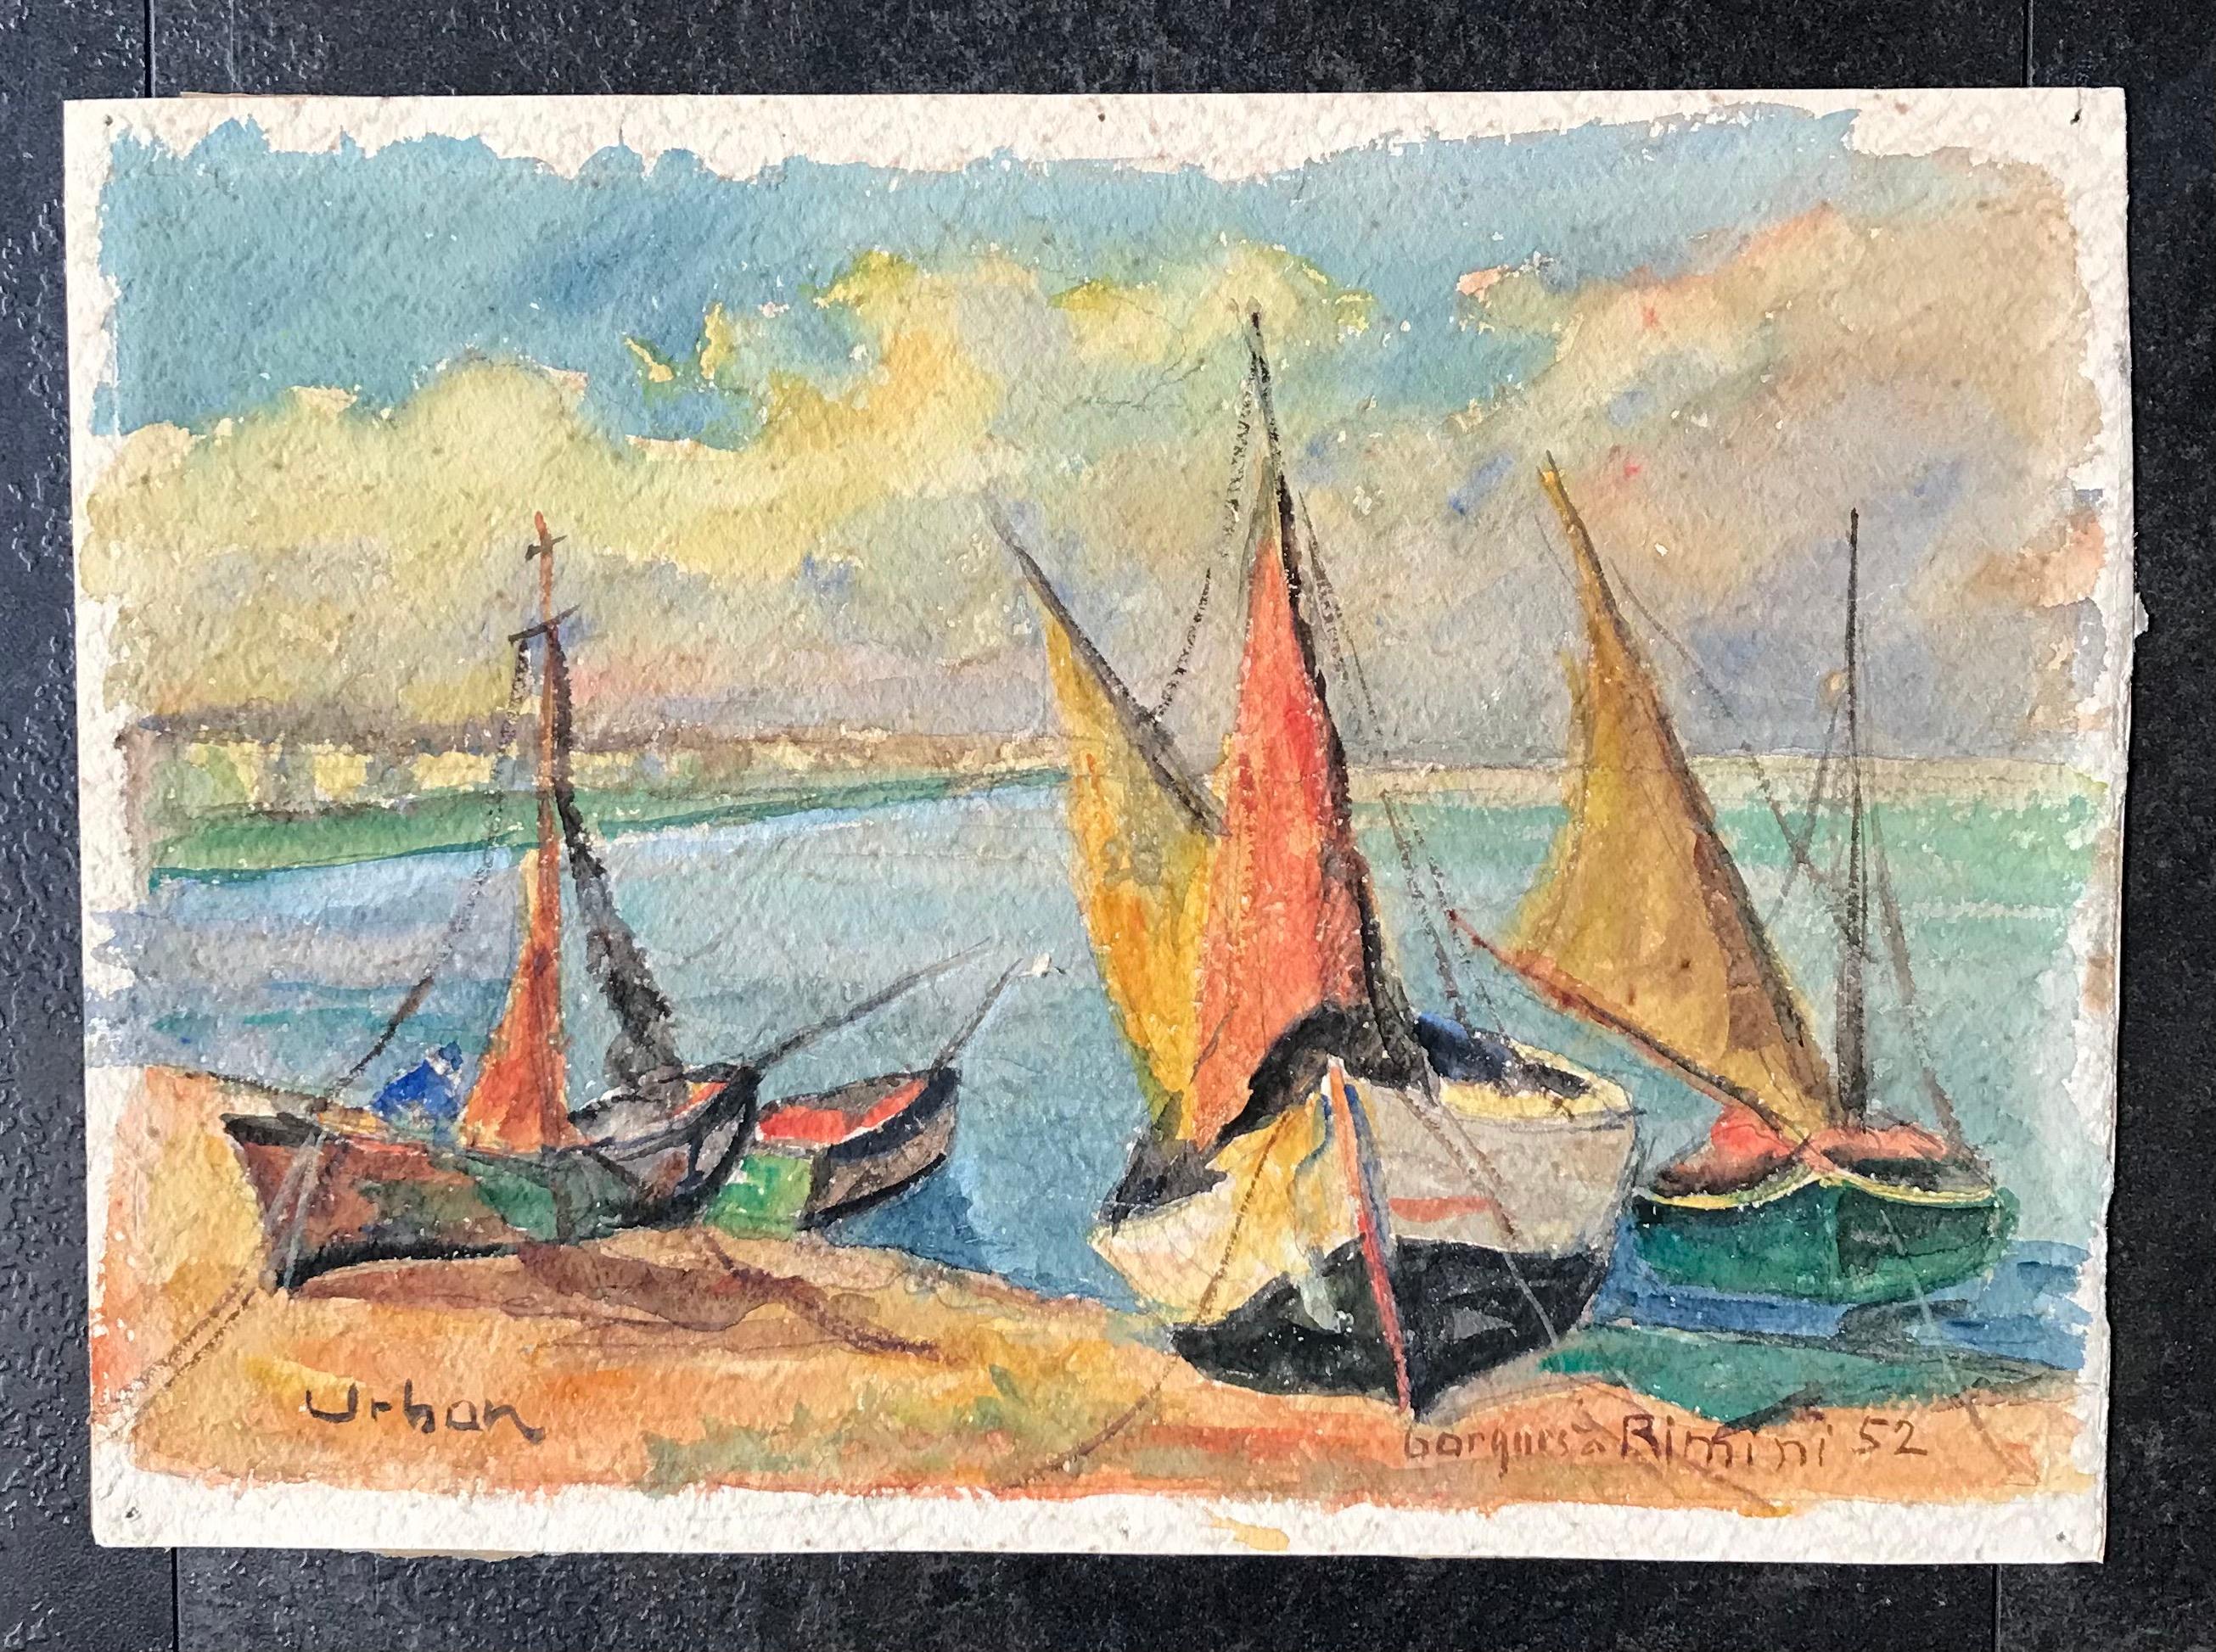 Boats in Rimini, Italy by Harry Urban - Watercolor on paper 35x36 cm For Sale 2